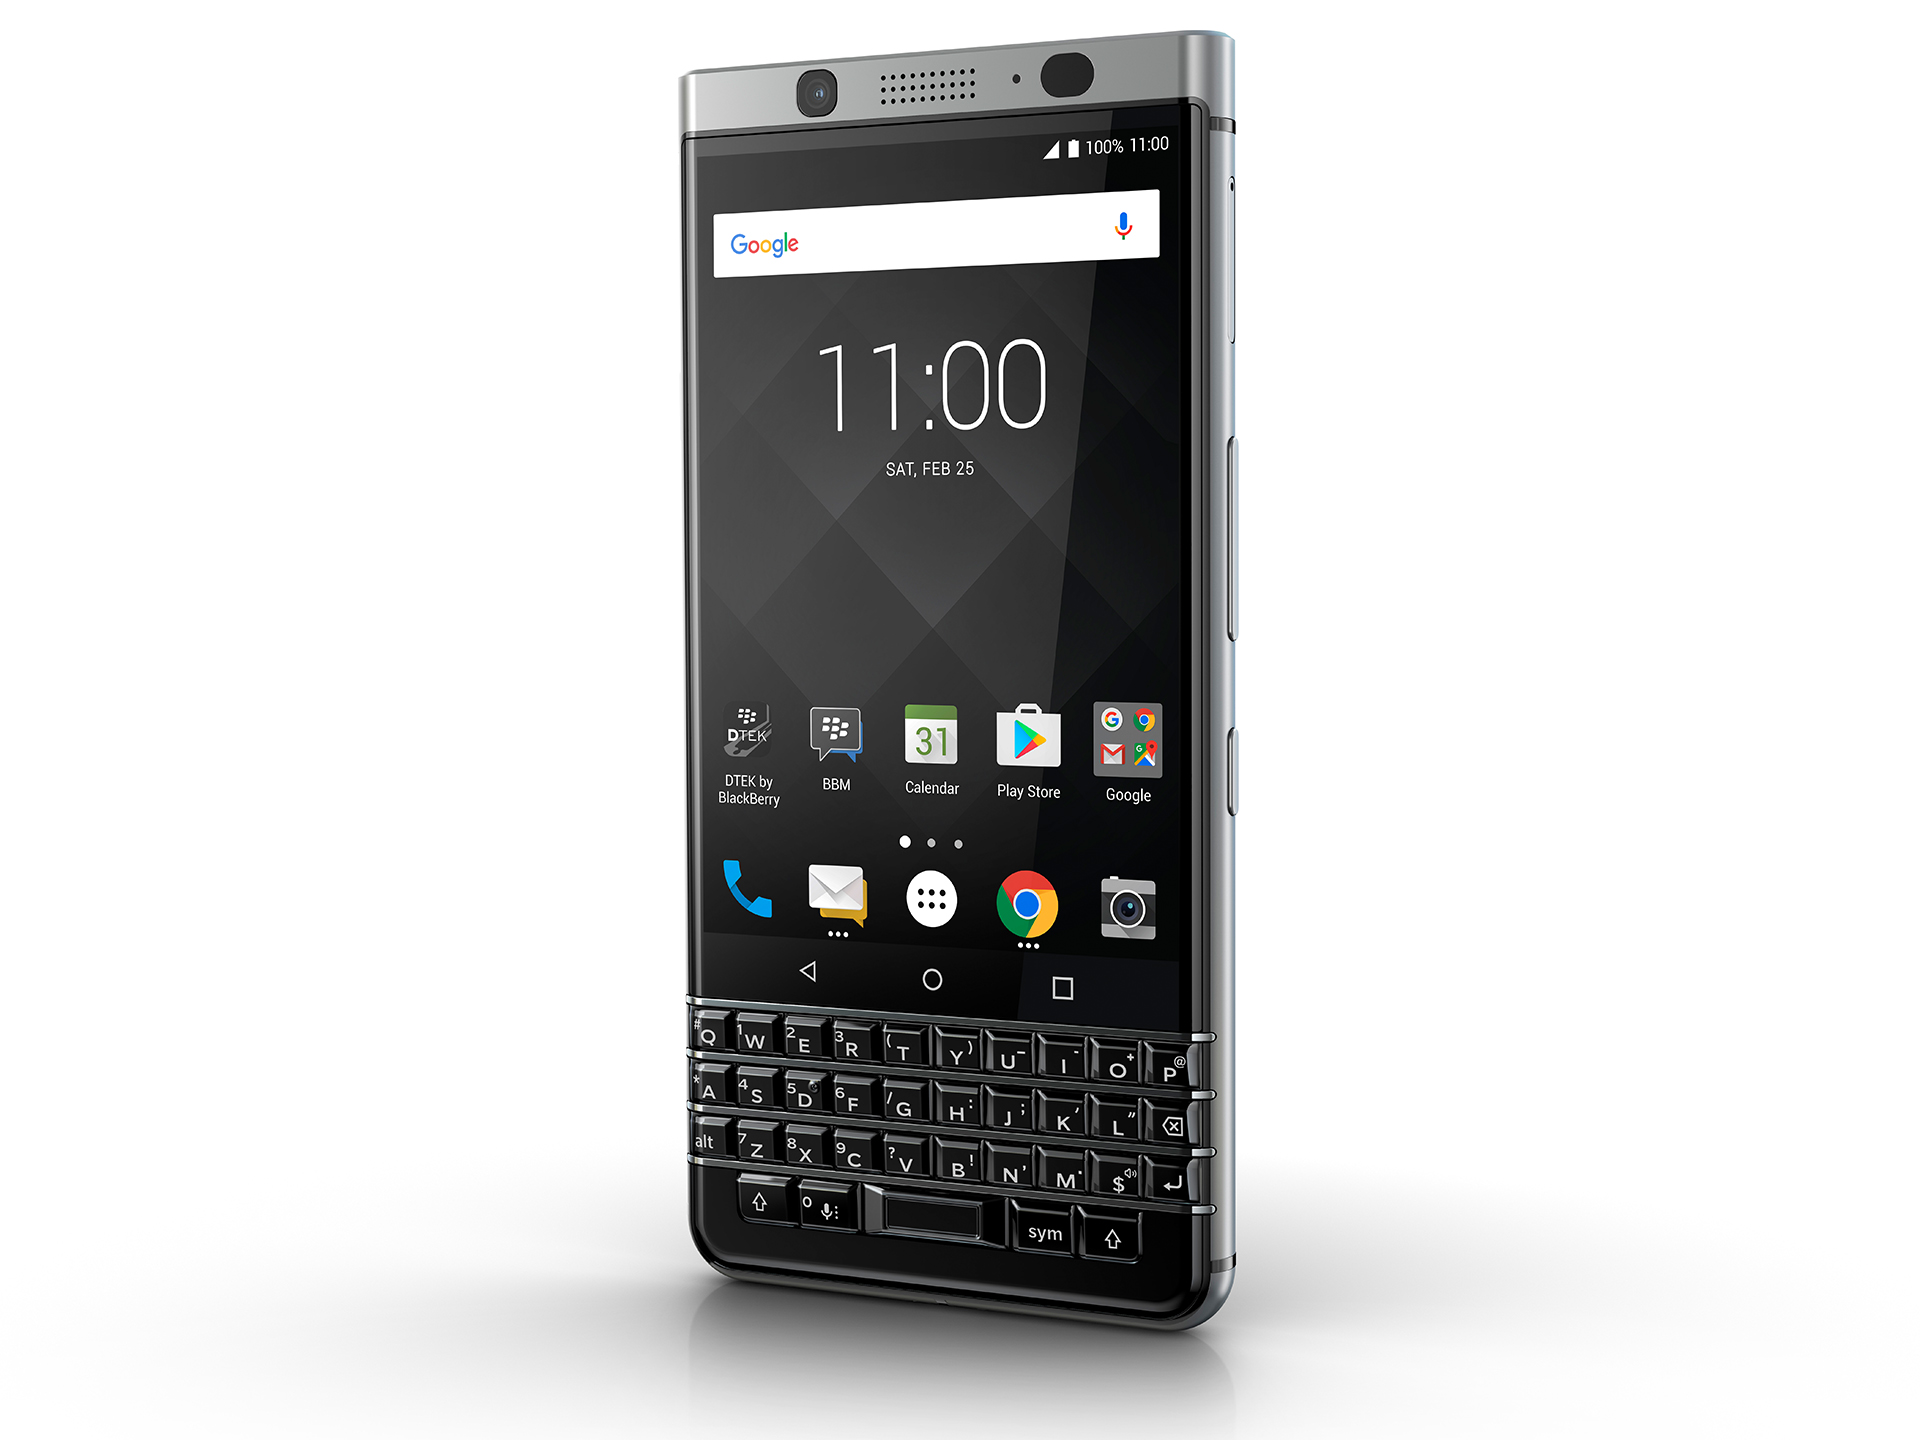 BlackBerry Launches Security-Focused KEY2 Smartphone with Physical Keyboard  - PC Perspective